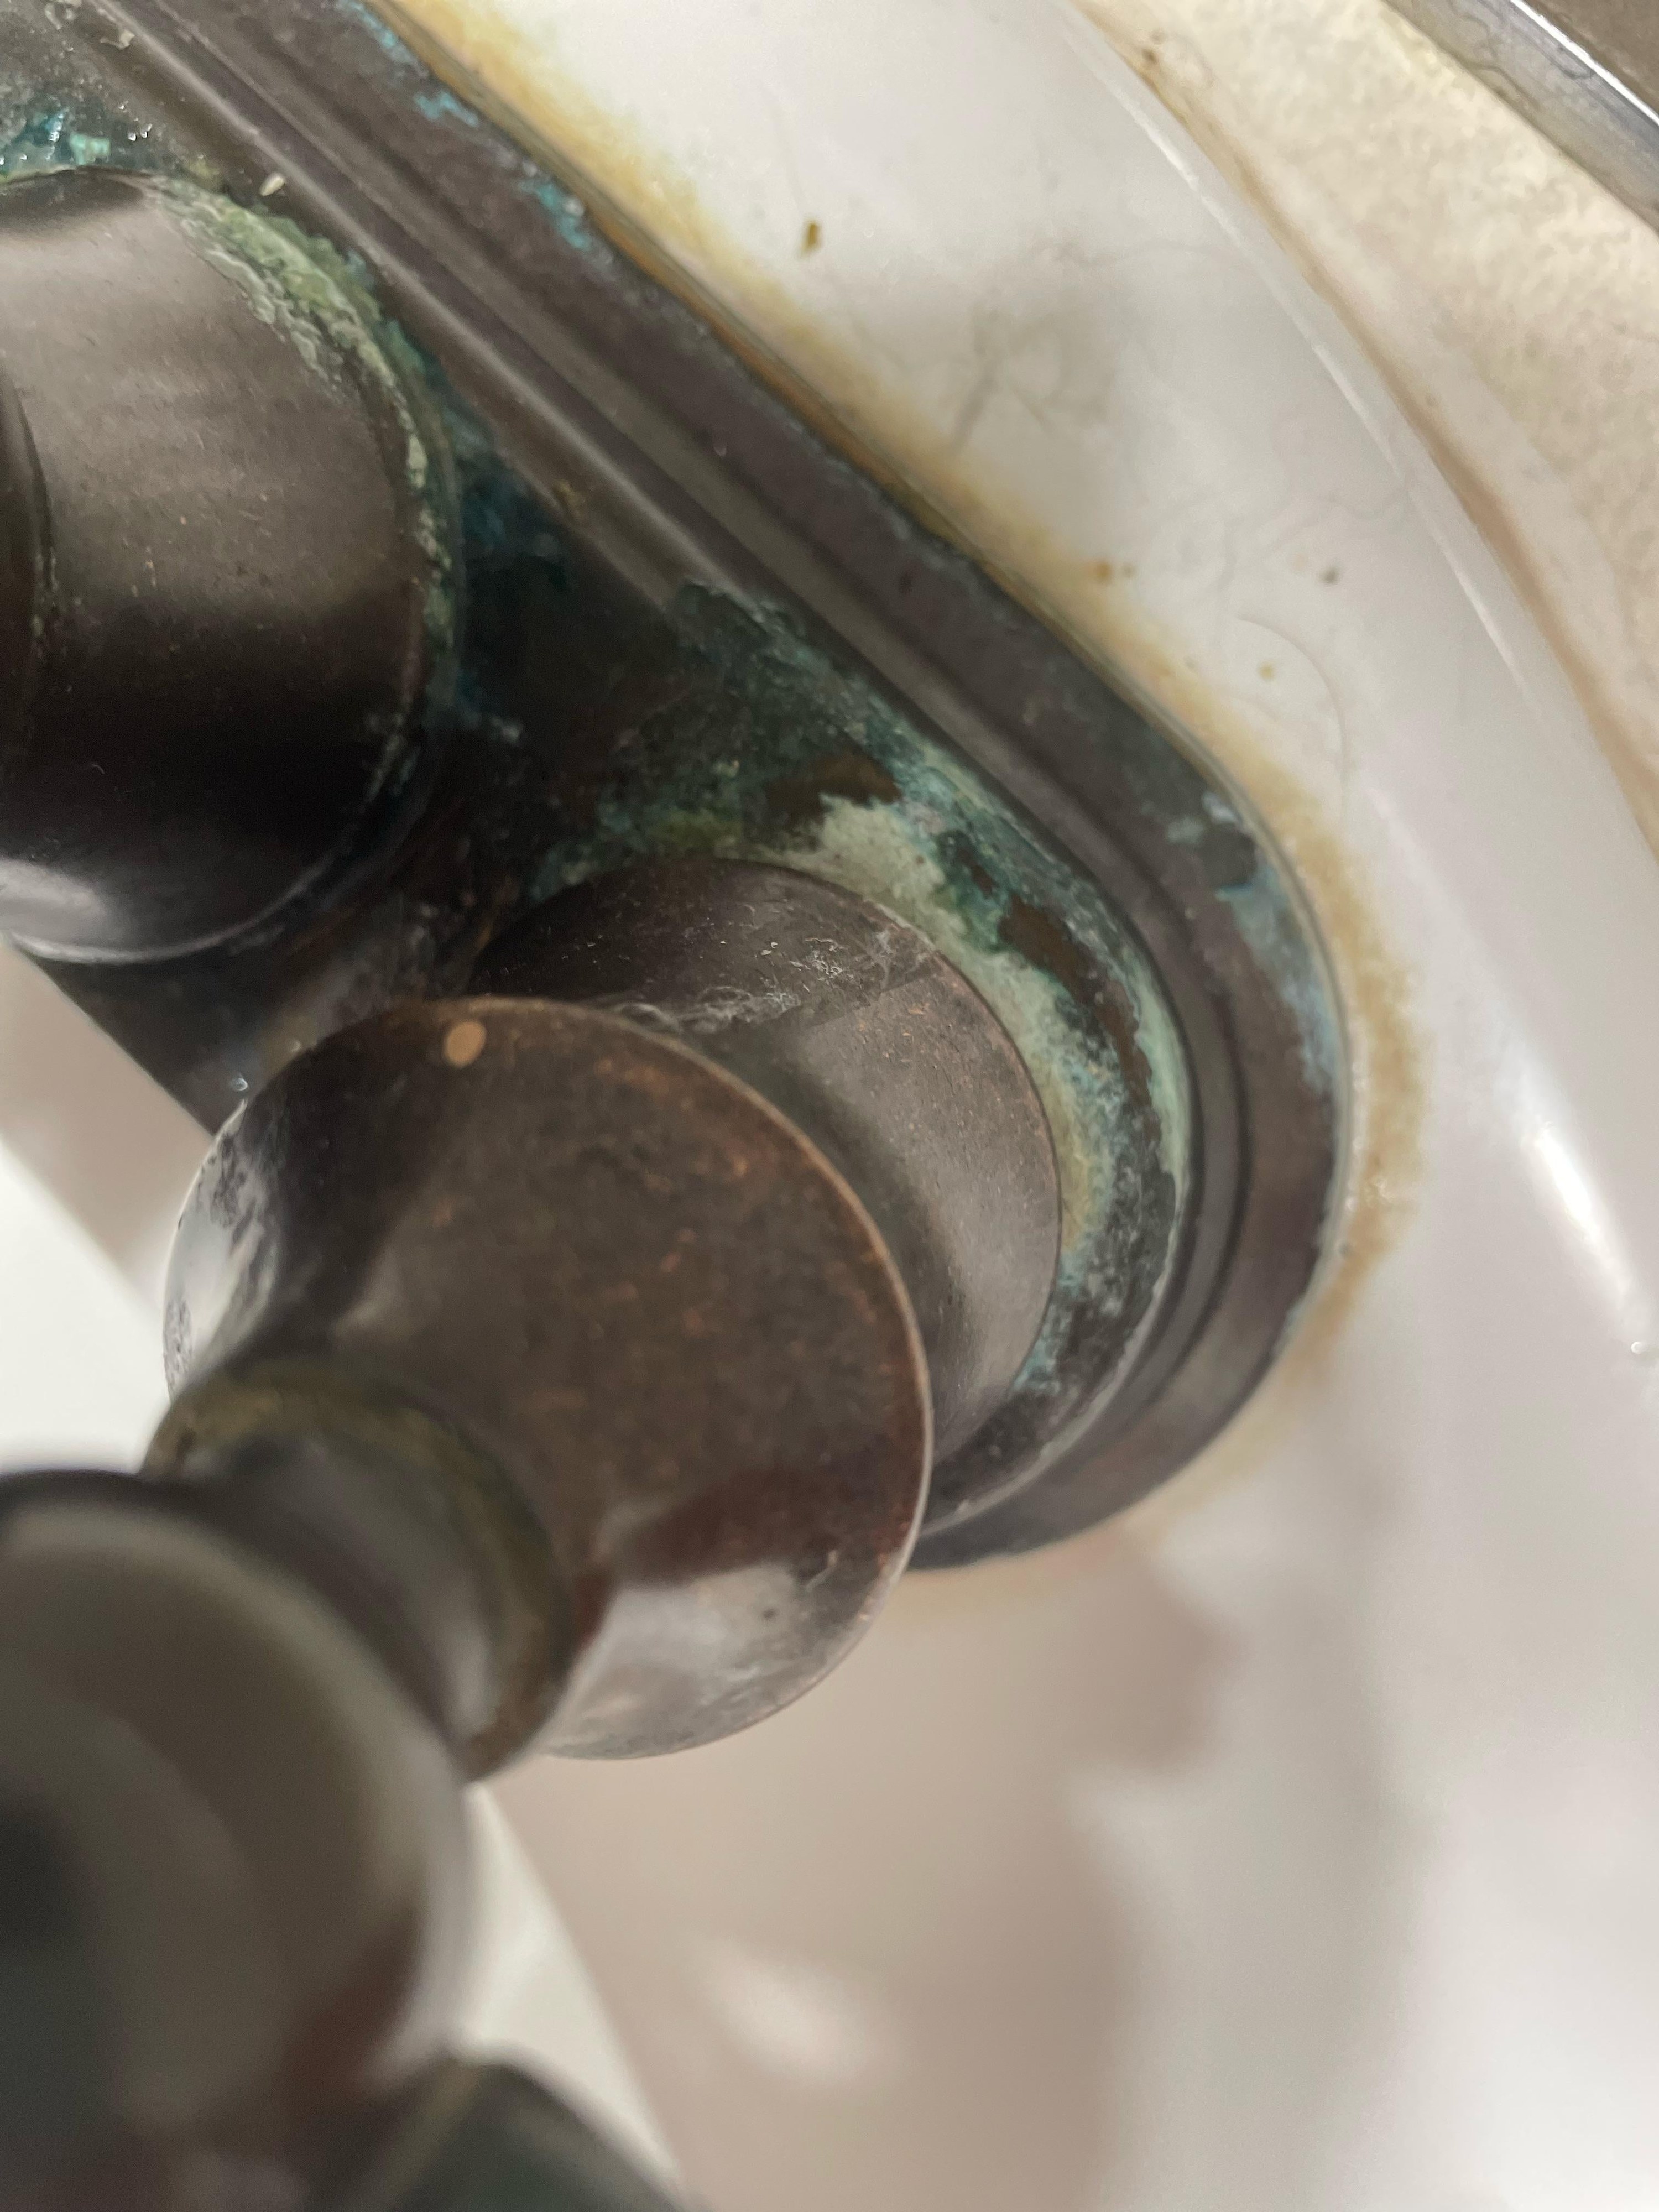 rust and deposits on a copper faucet on bathroom sink